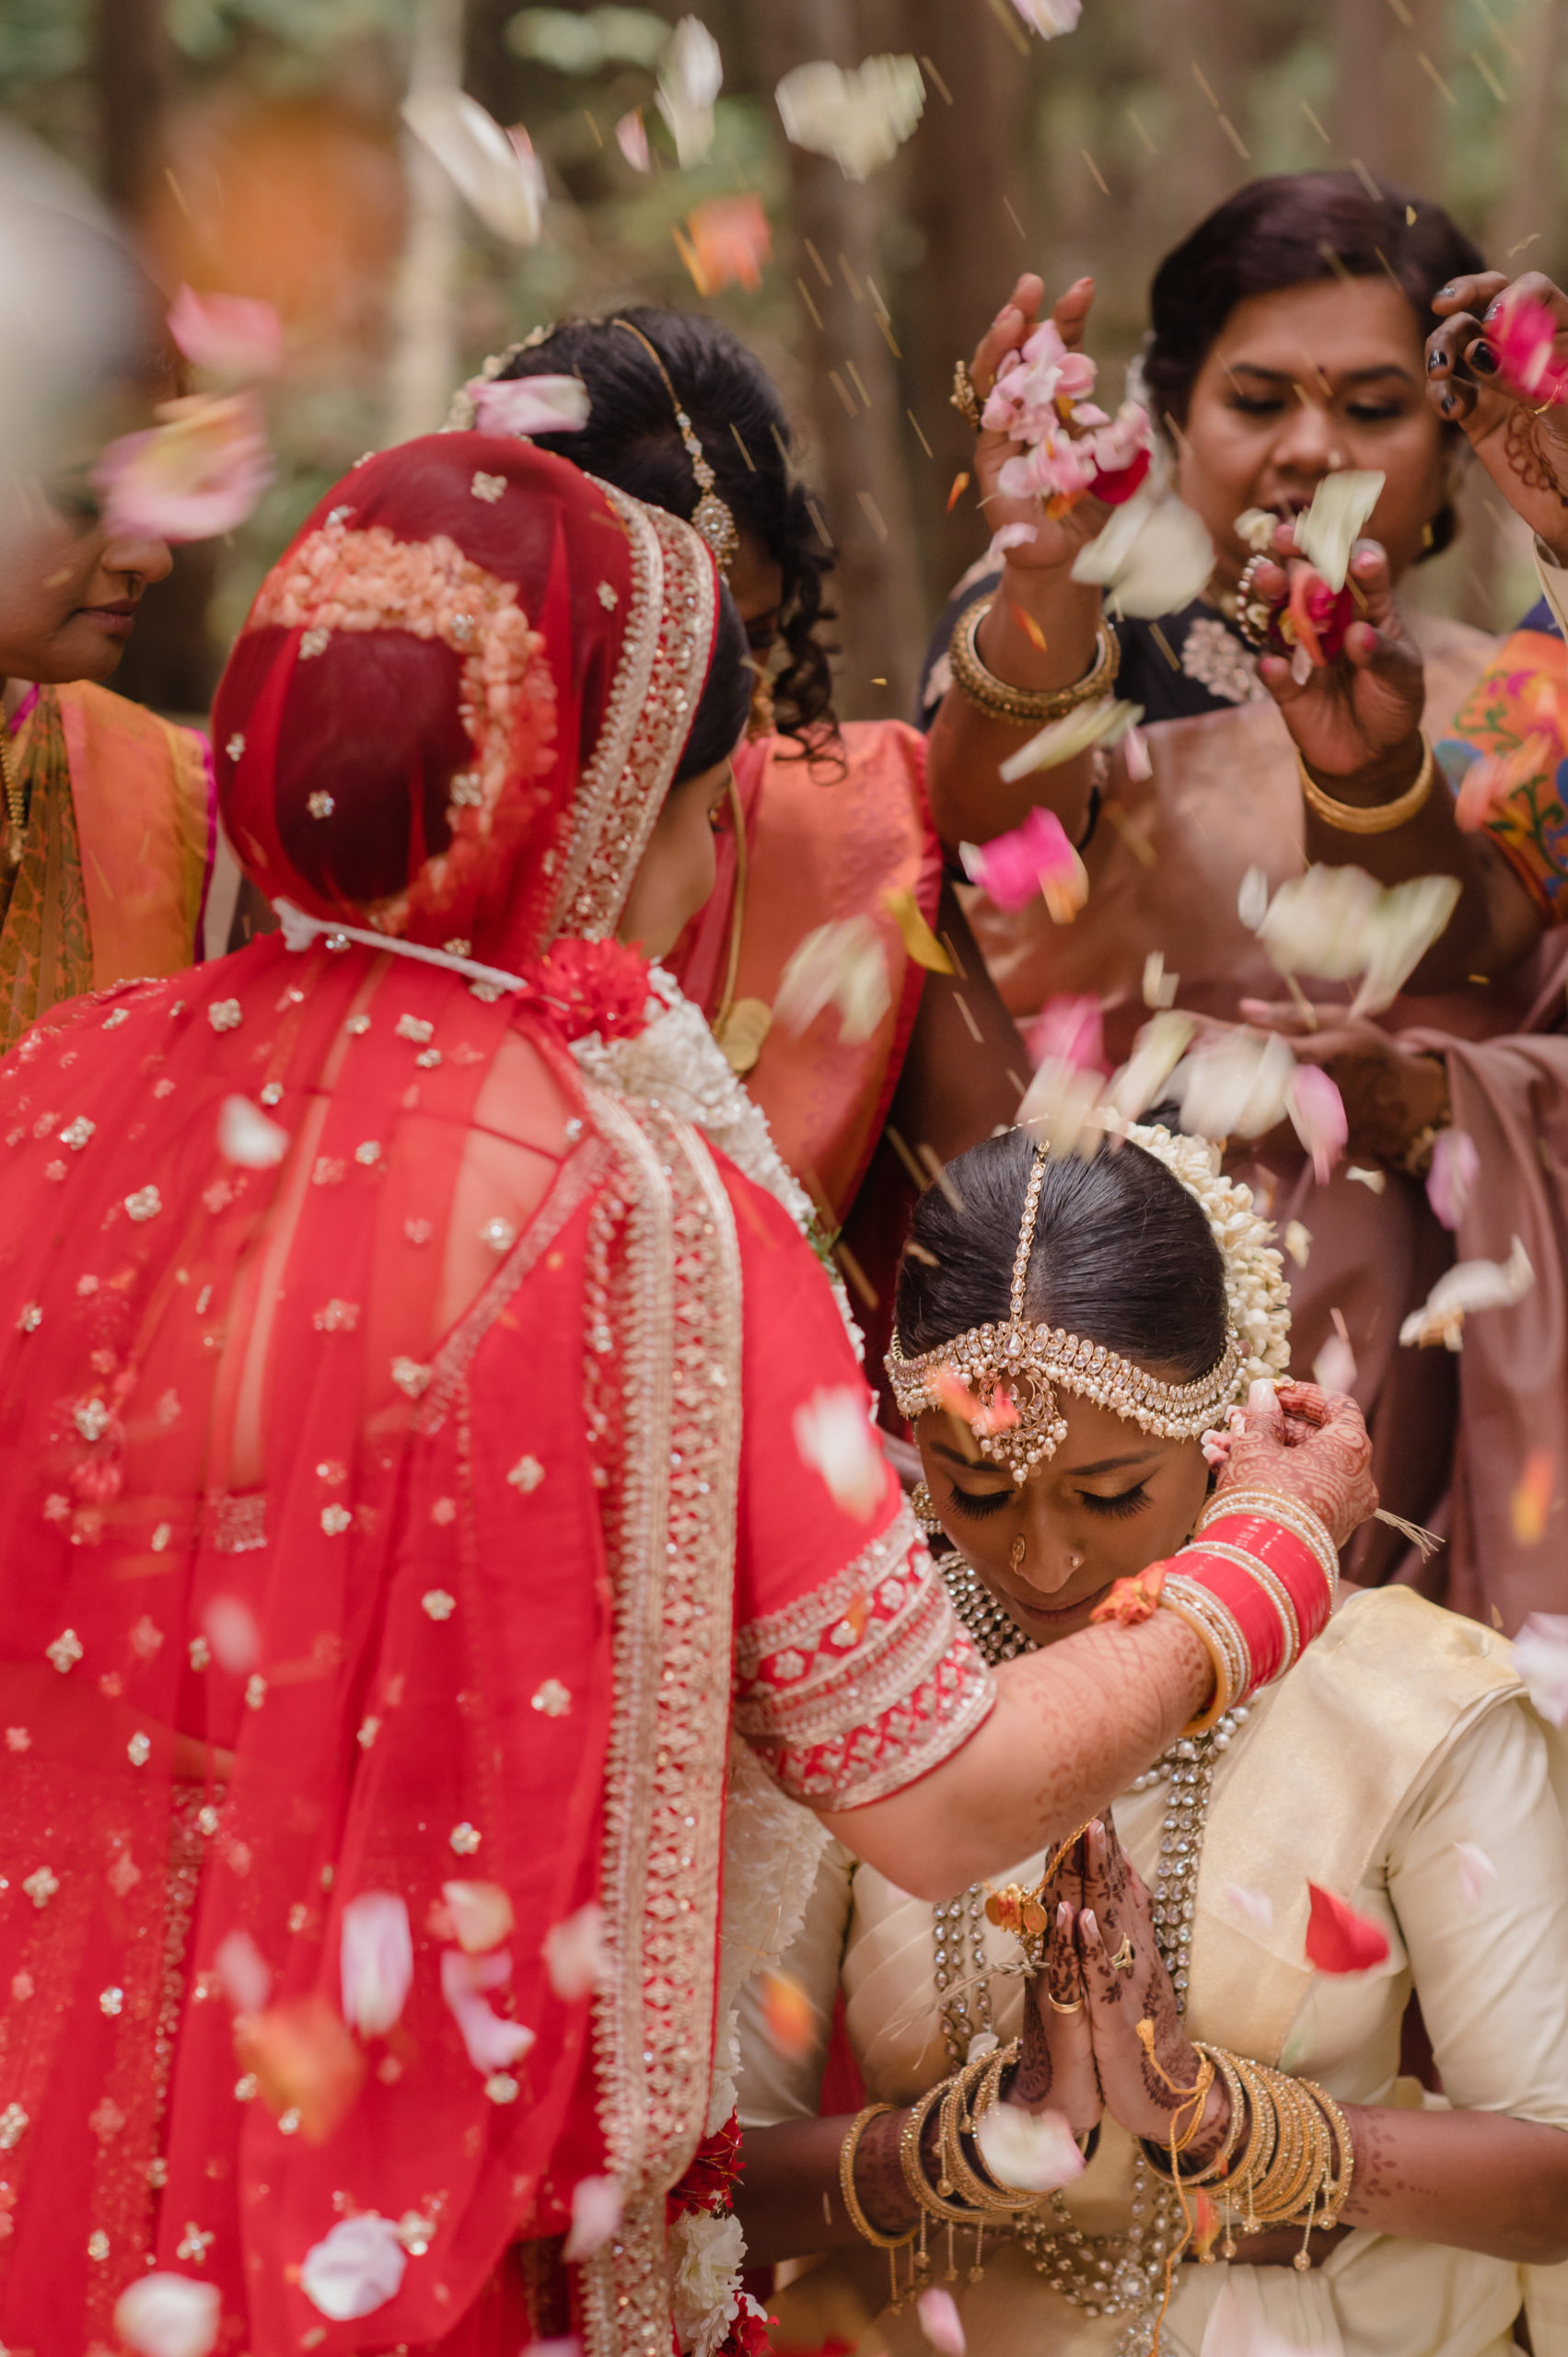 A South Asian person kneels in front of their spouse as family throws rose petals on both of them. The person in the front stands and is wearing a red lehenga.